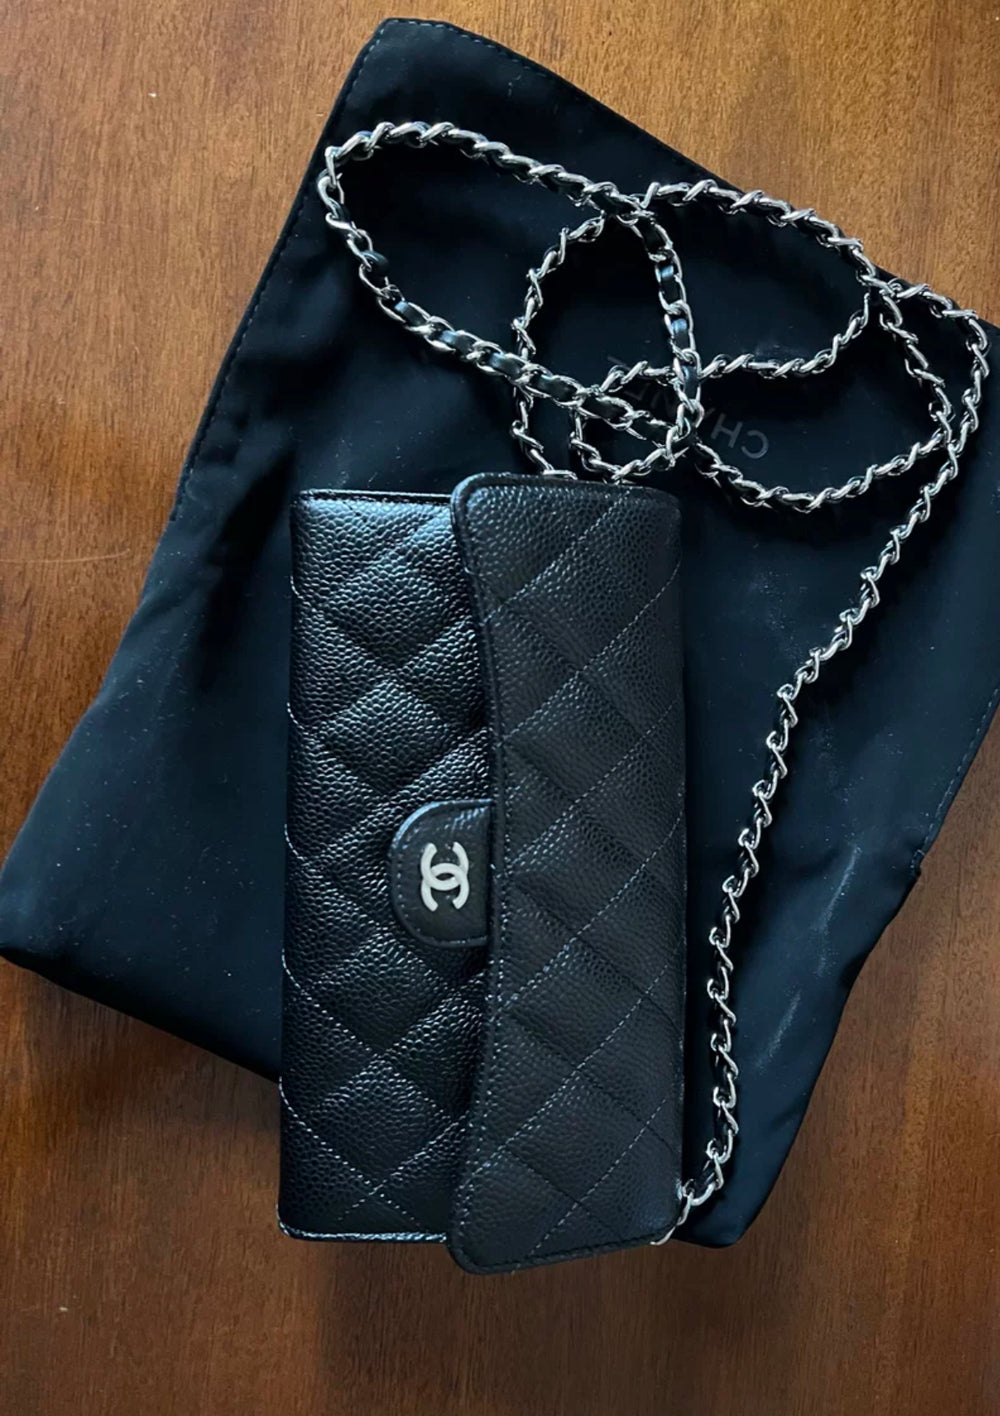 Isabella J. review of Converter Kit for Chanel Long Wallet